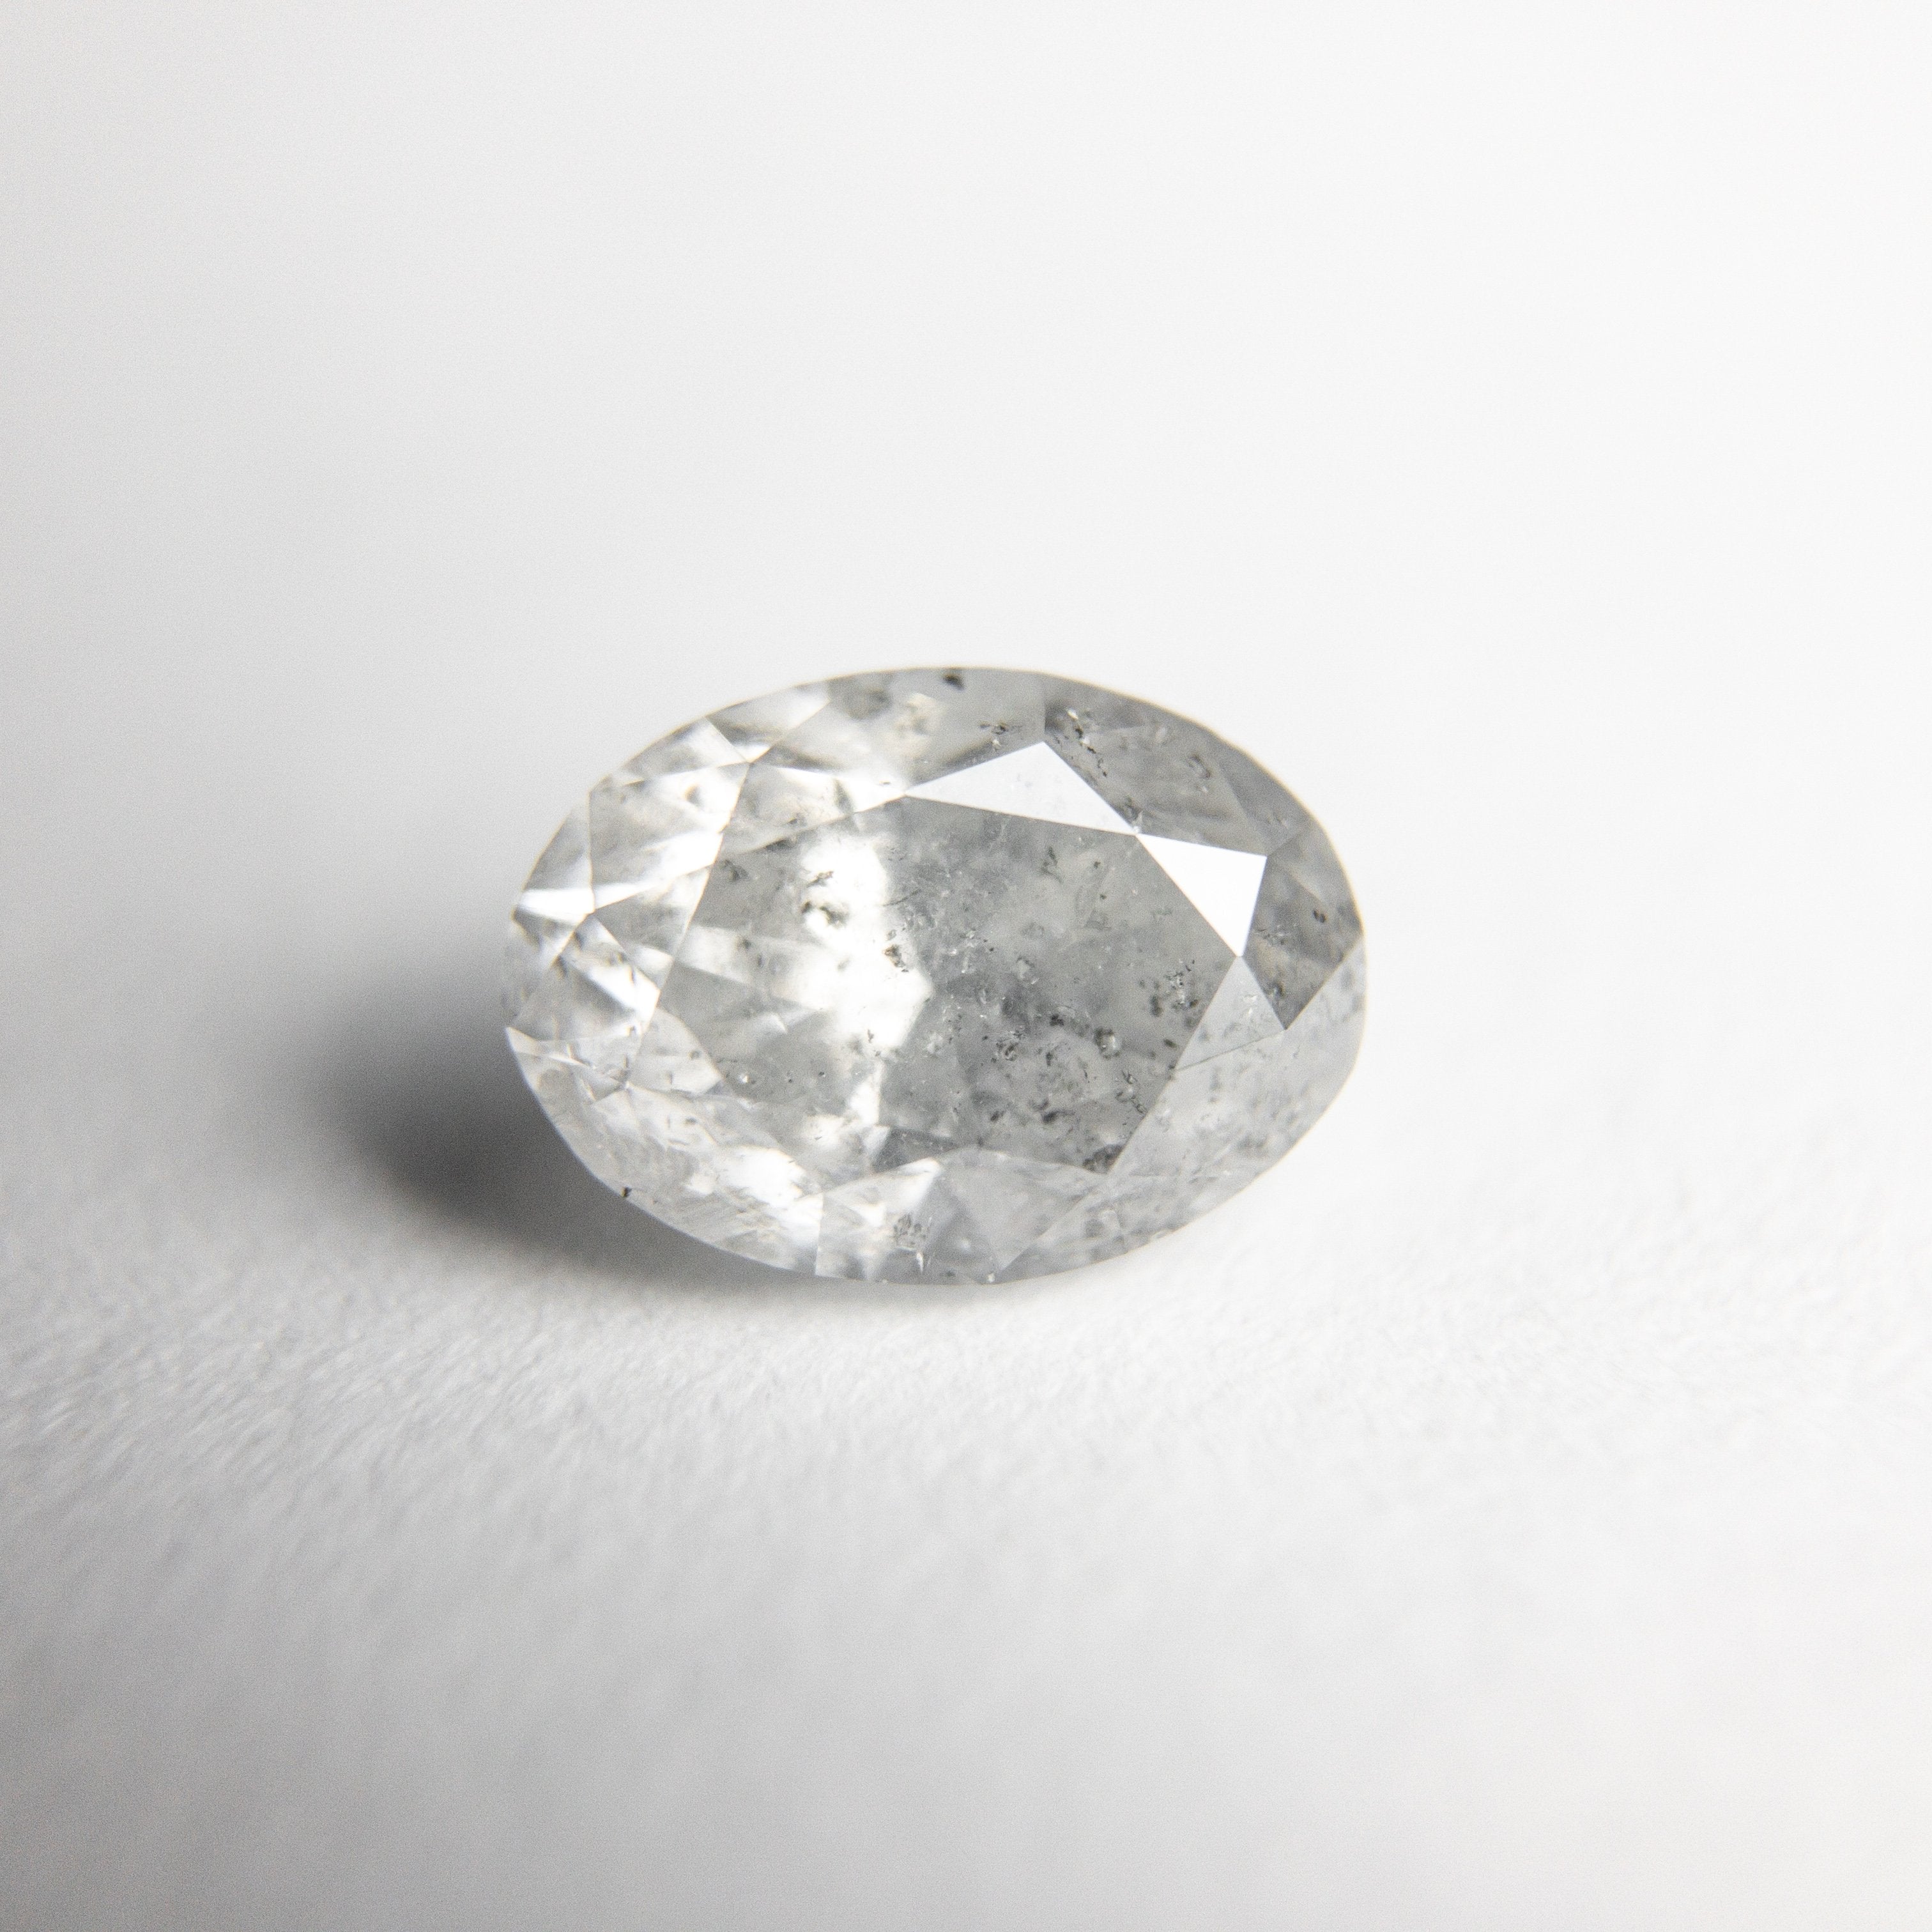 0.93ct 7.05x5.08x3.84mm Oval Brilliant 18399-02 Hold 11/24/20 D1418